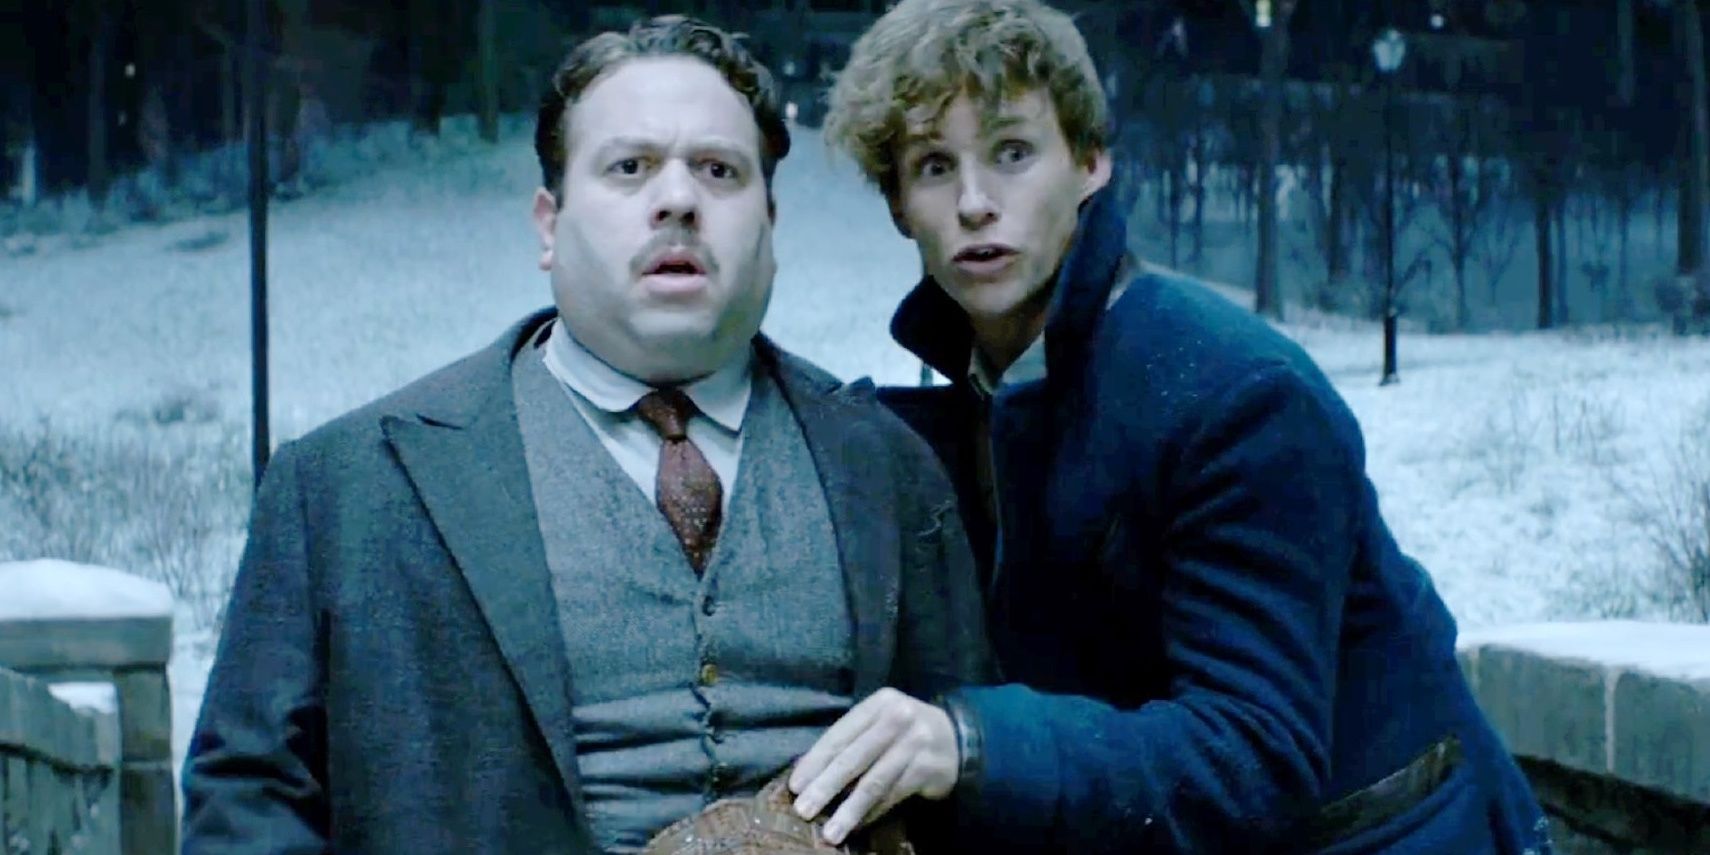 Jacob and Newt in Fantastic Beasts